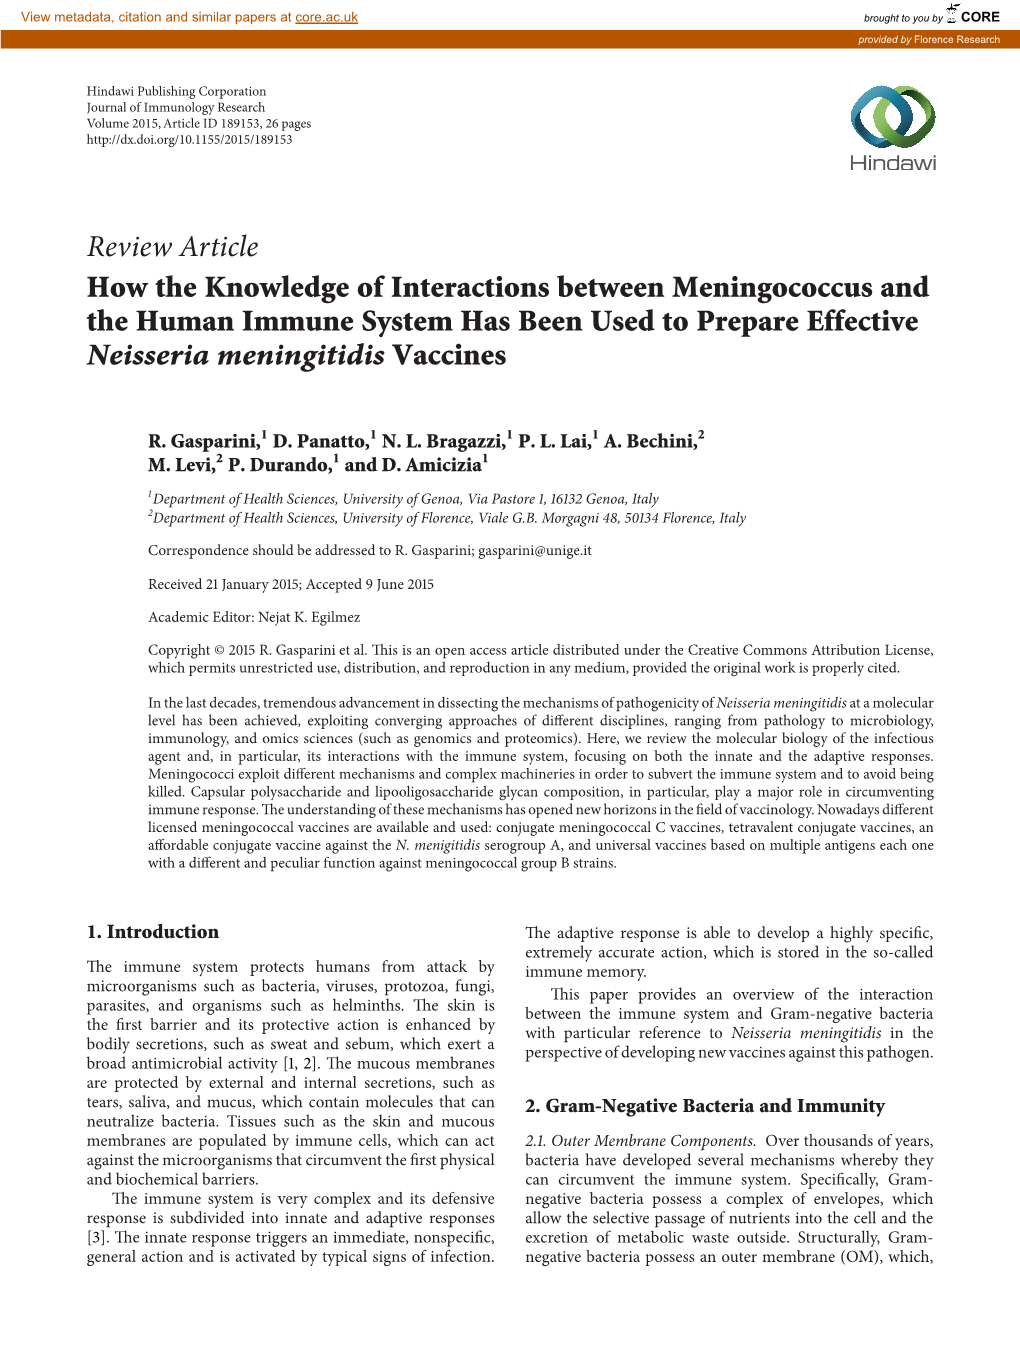 Review Article How the Knowledge of Interactions Between Meningococcus and the Human Immune System Has Been Used to Prepare Effective Neisseria Meningitidis Vaccines